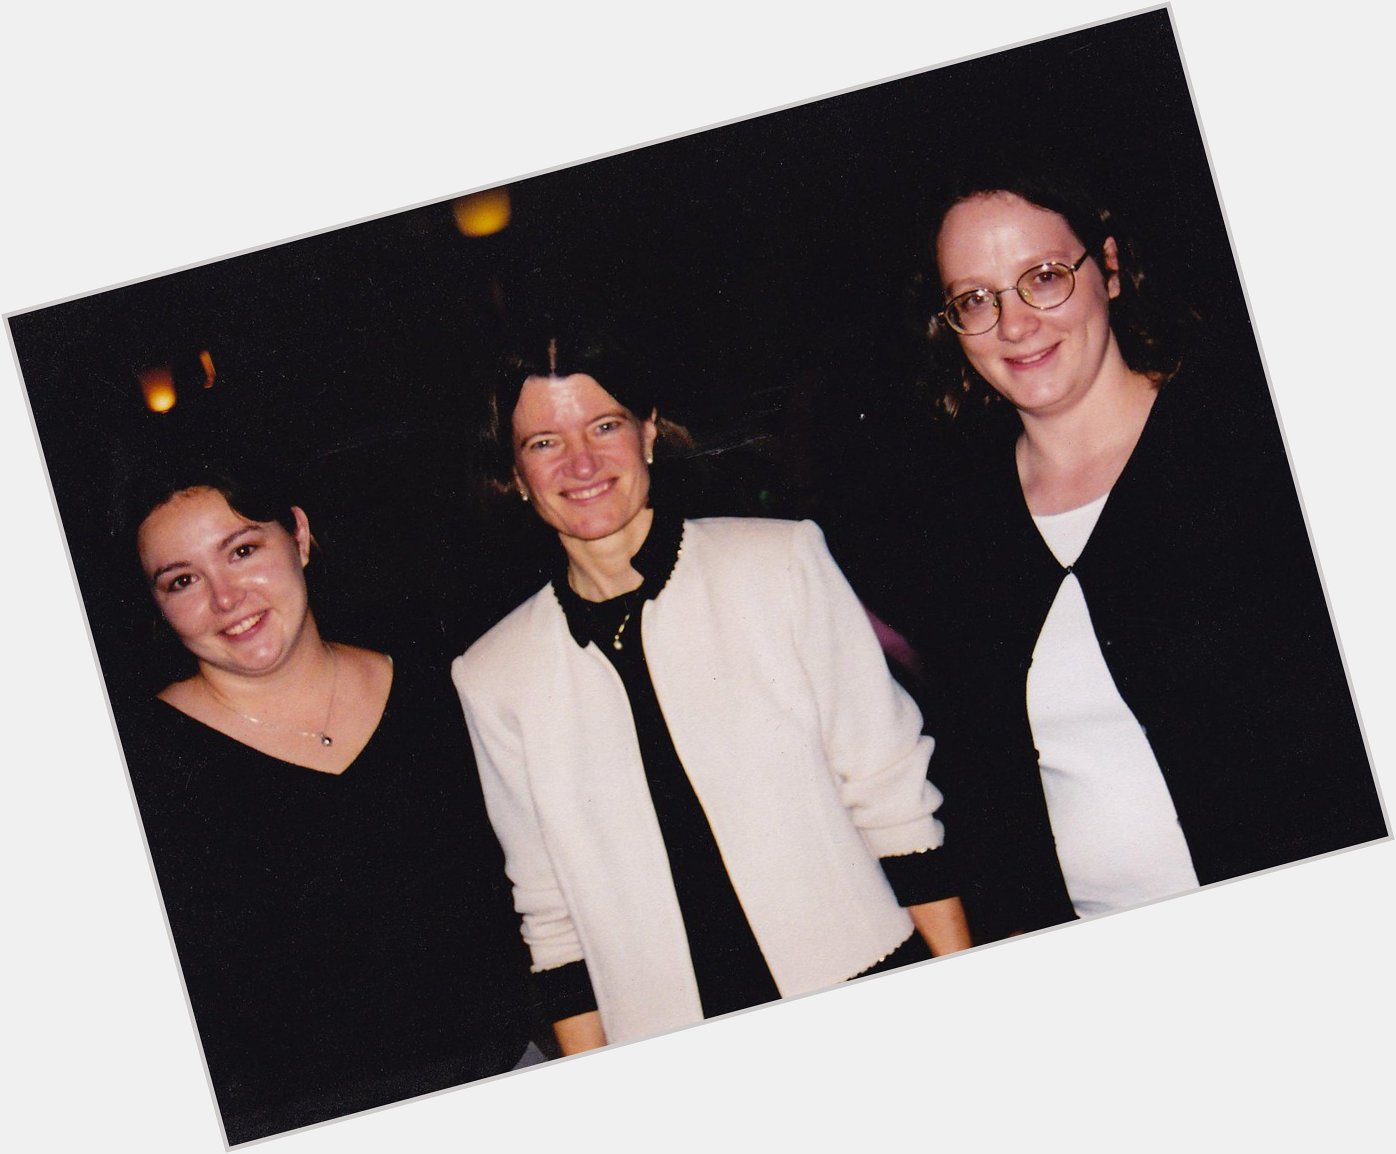  Happy Birthday, Sally Ride! Got to meet her in 2001. She is missed, but her contributions live on. 